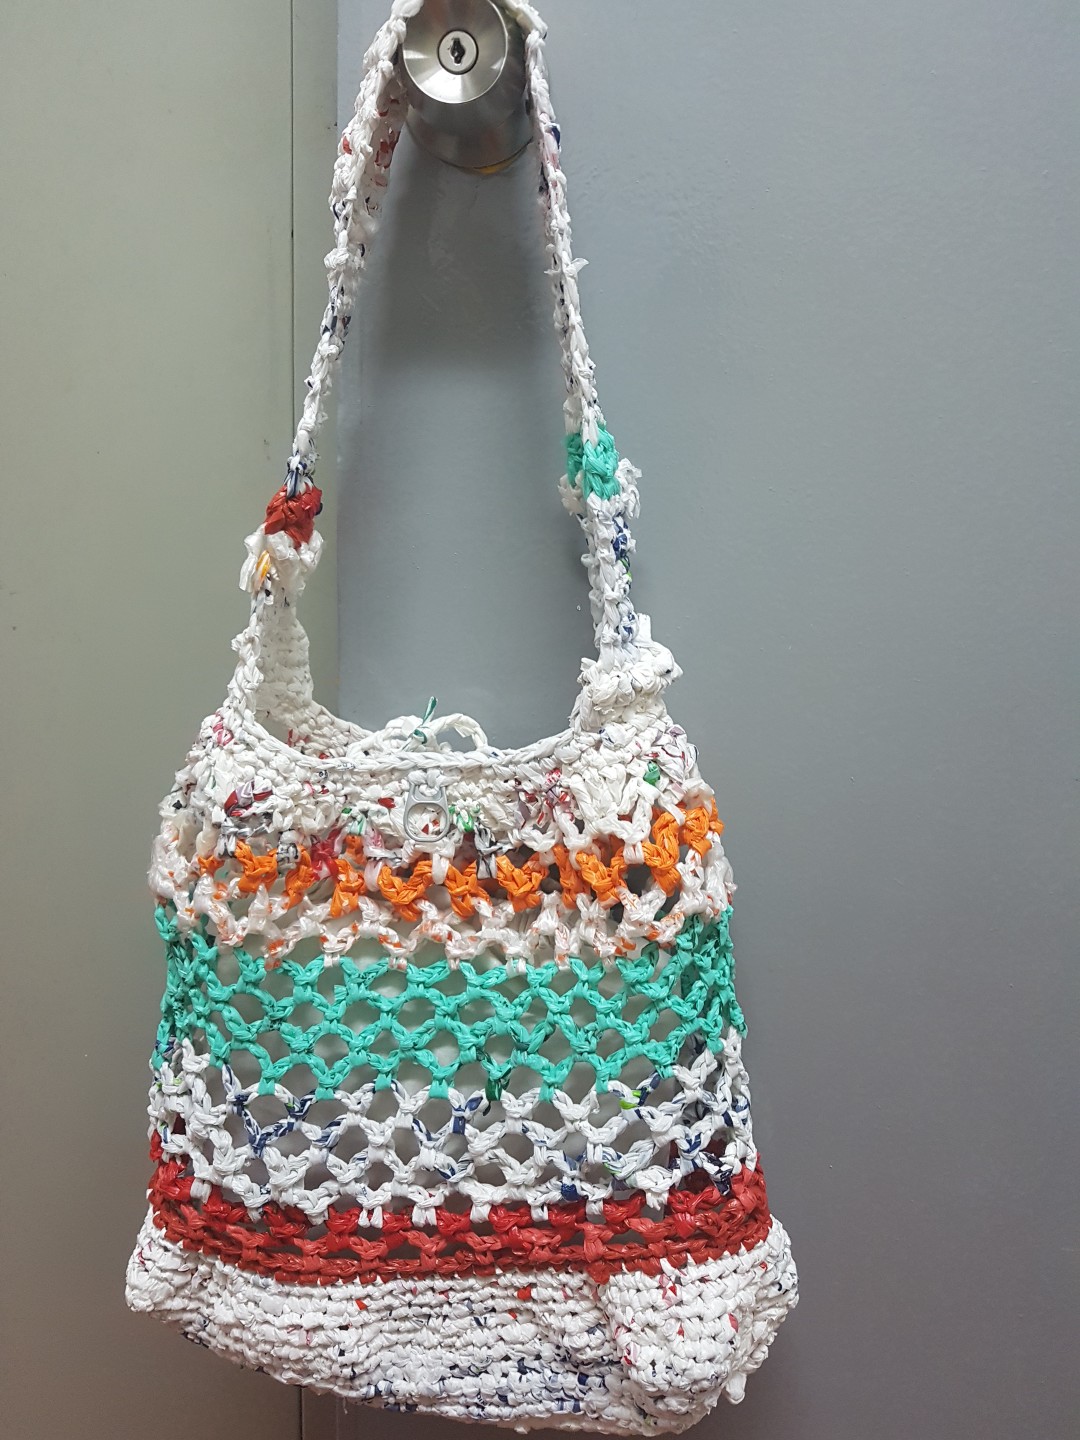 handmade bags from recycled materials